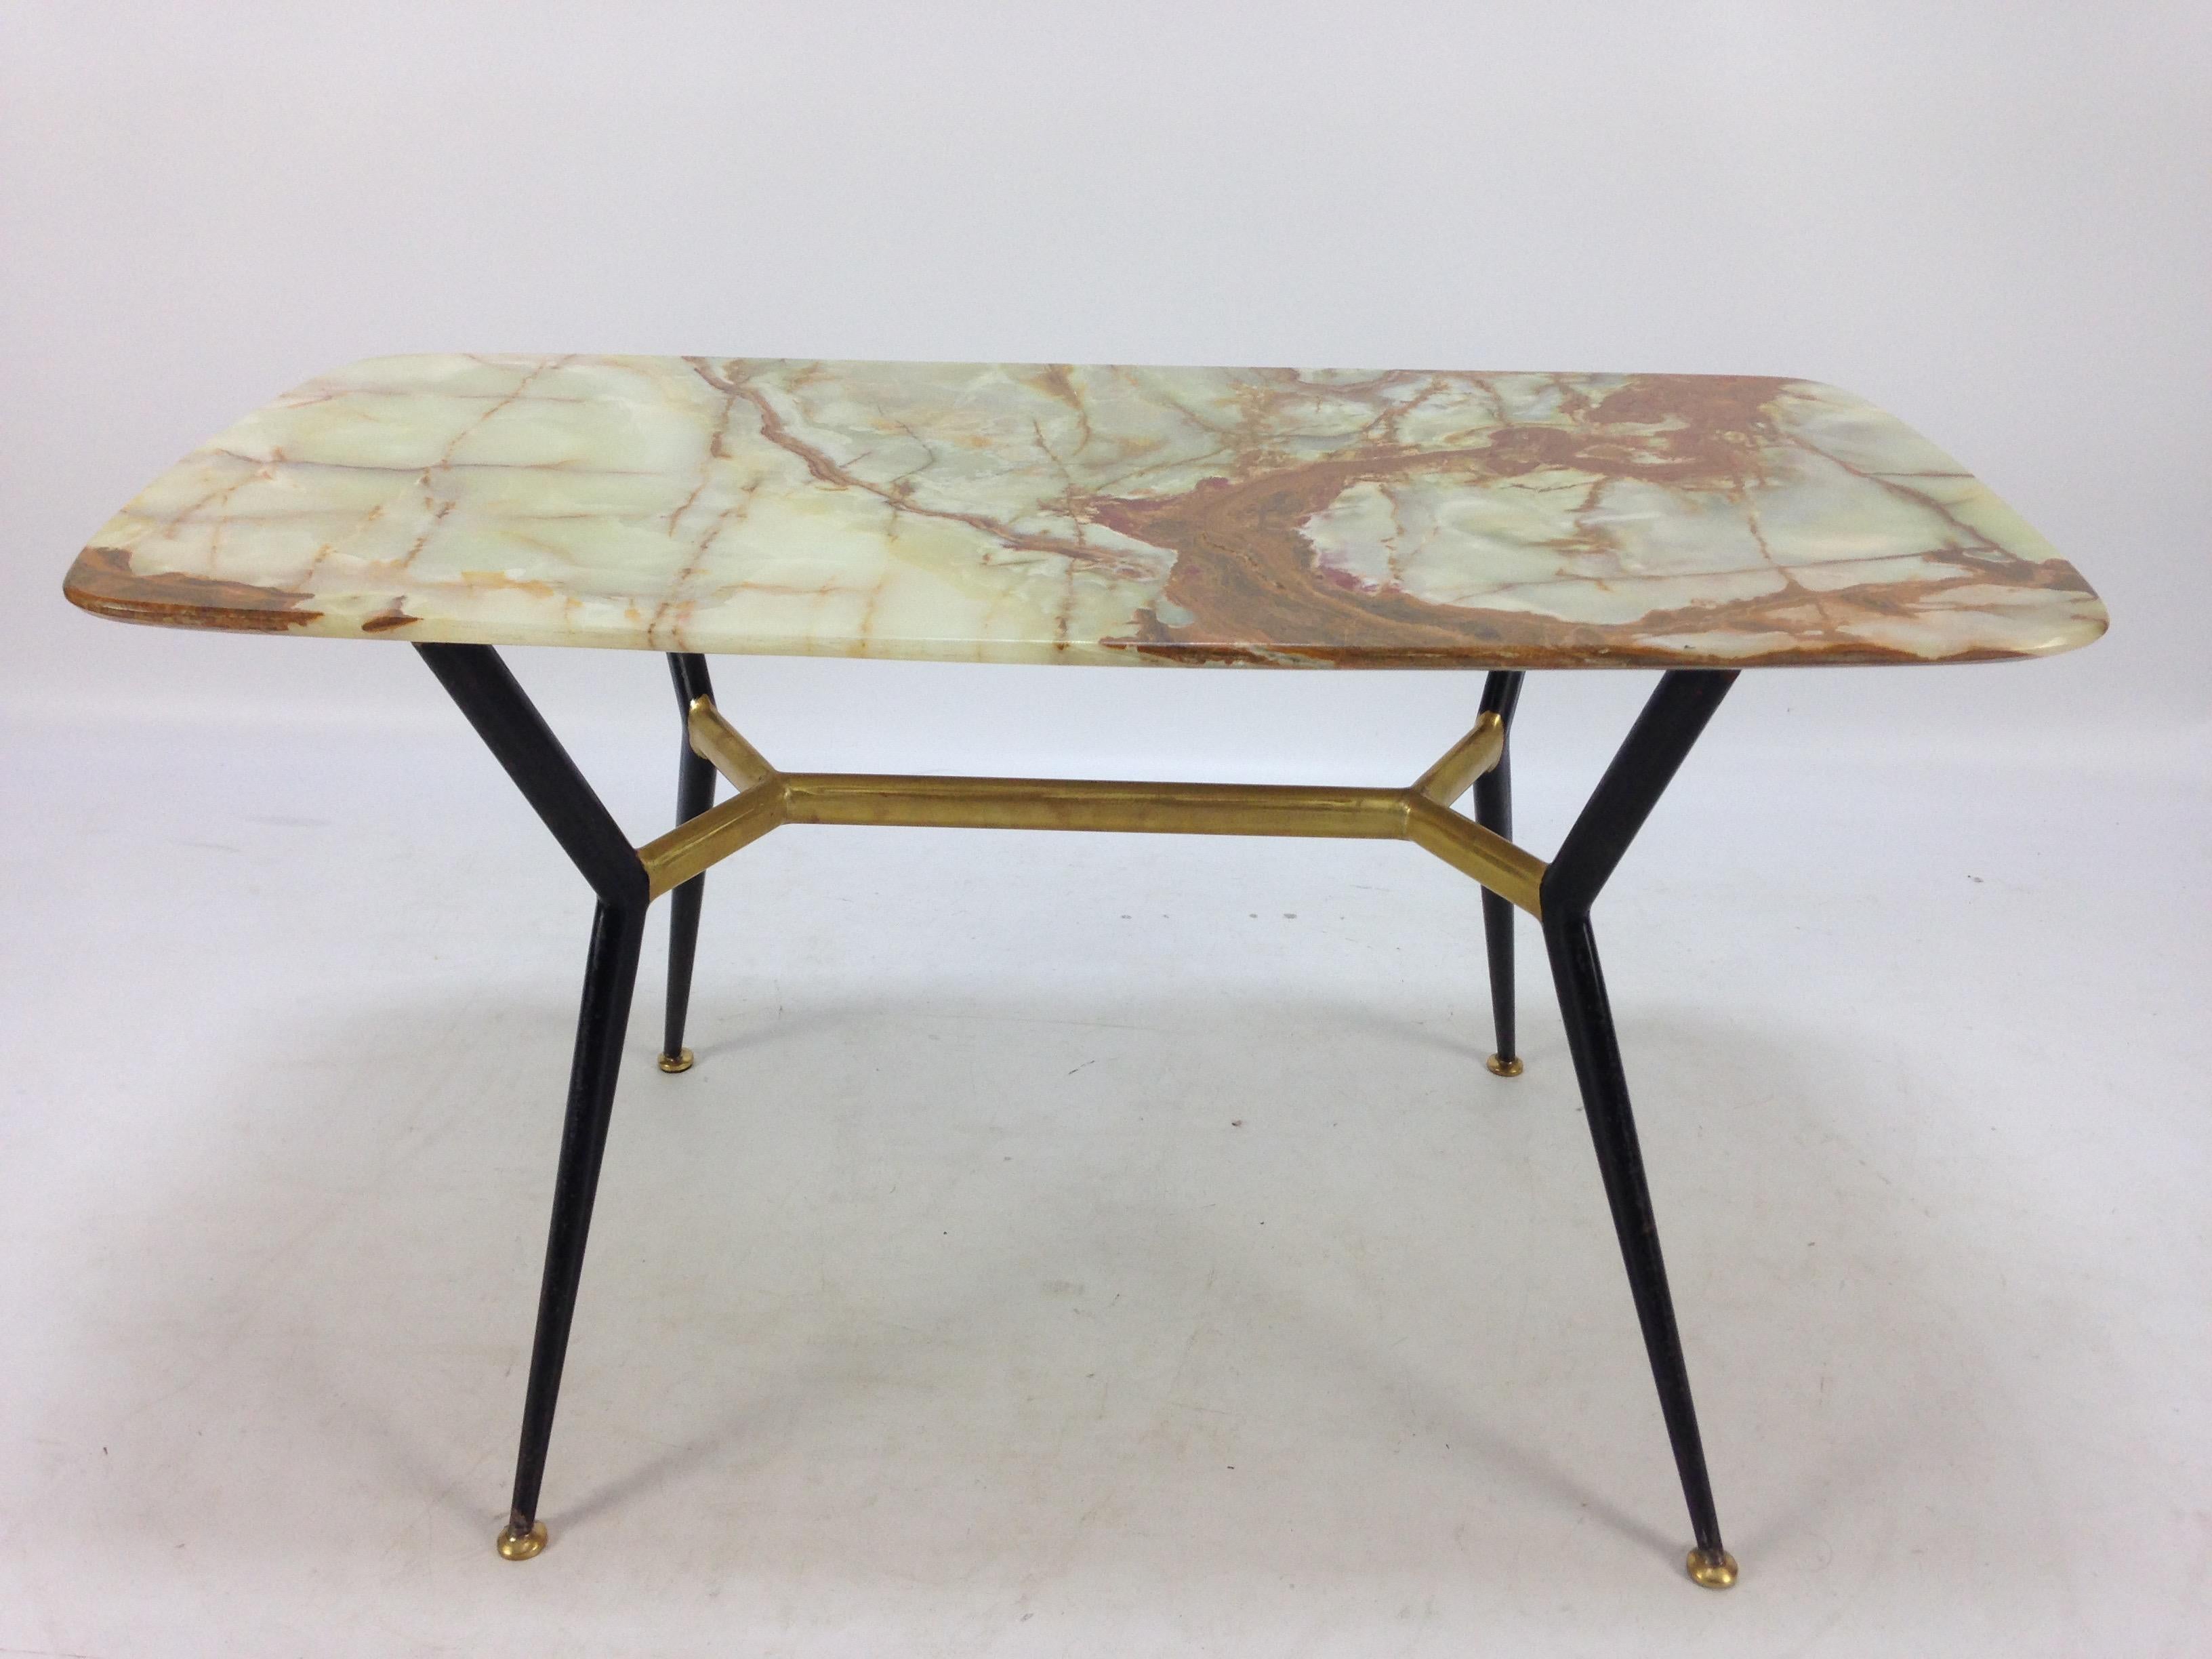 Beautiful coffee table with gorgeous elegant marble top and metallic legs with brass tips. Made in Italy during the 1950s. The marble has a beautiful natural design with mineral veins of different color and size, rare to find in such a great